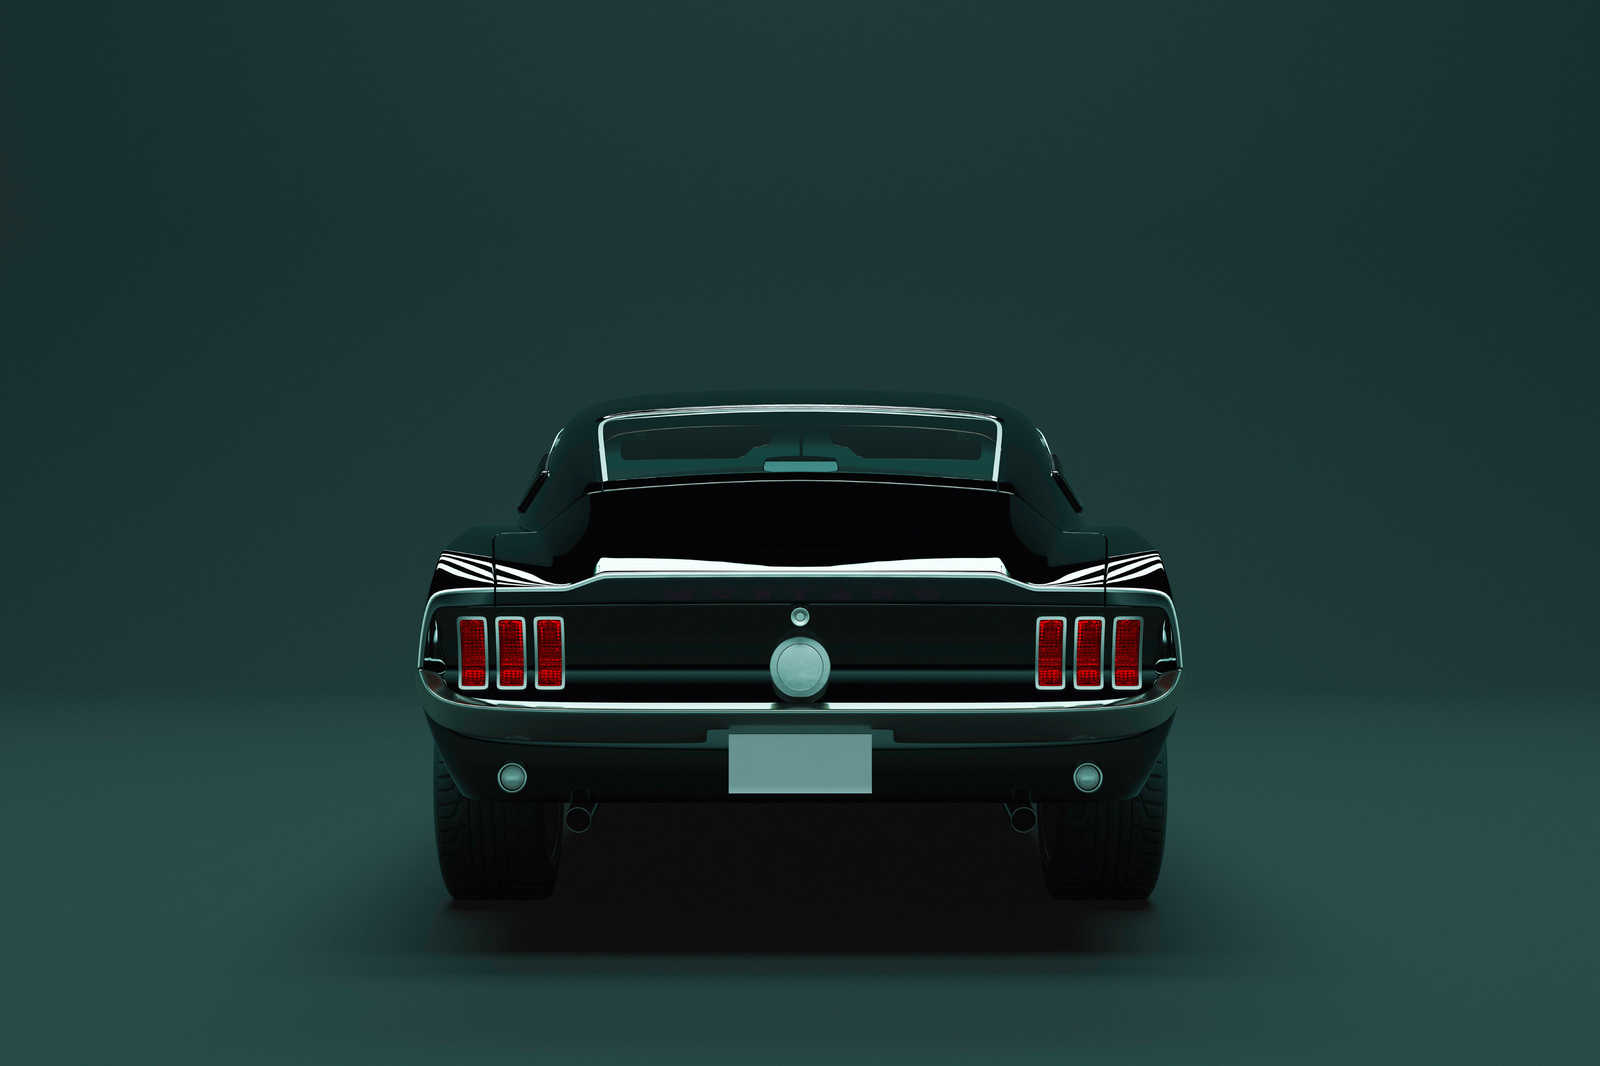             Mustang 3 - American Muscle Car Canvas Painting - 0.90 m x 0.60 m
        